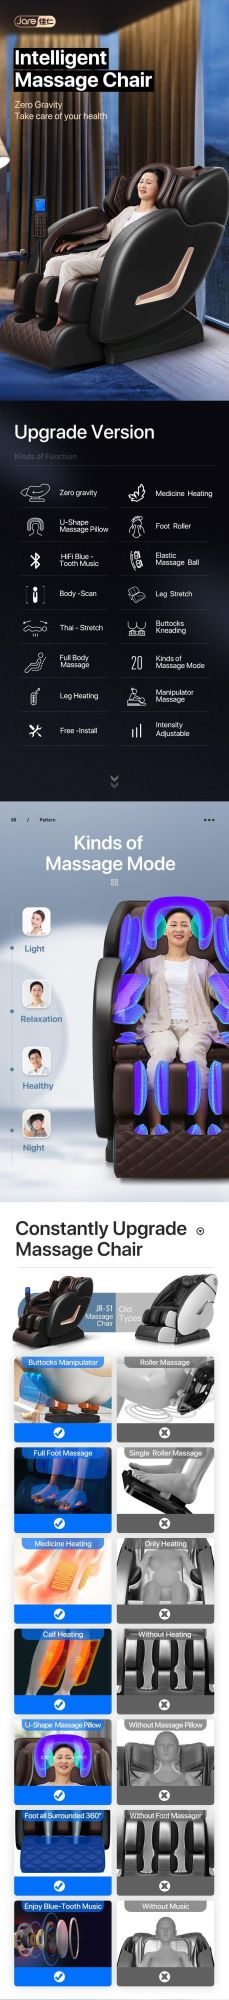 Jare S1 Cheap Price High Quality Massage Machine for Home and Office Portable Recliner Shiatsu Foot Massage Chair